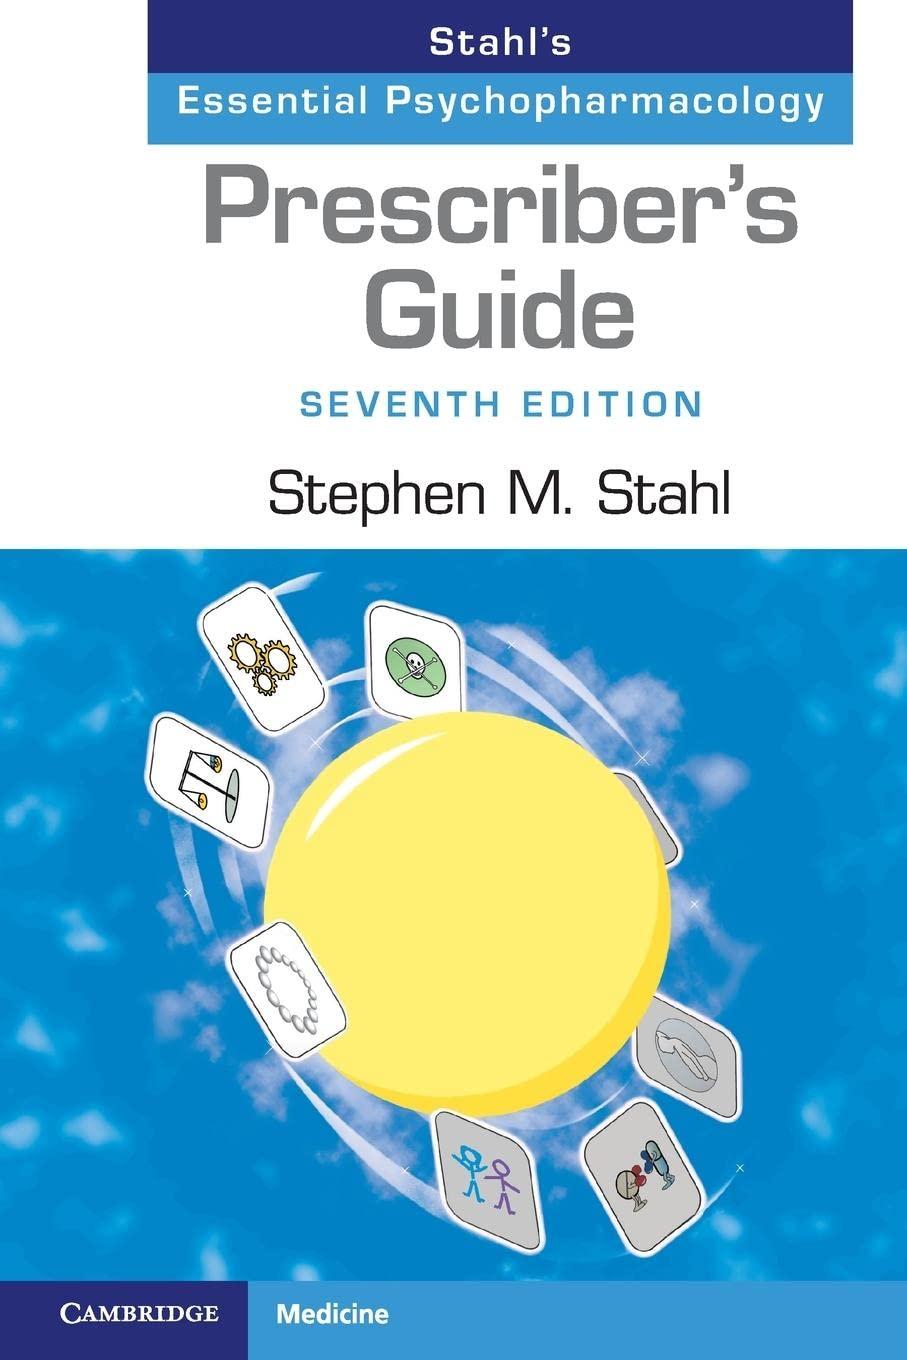 prescribers guide stahls essential psychopharmacology 7th edition stephen m. stahl 1108926010, 978-1108926010